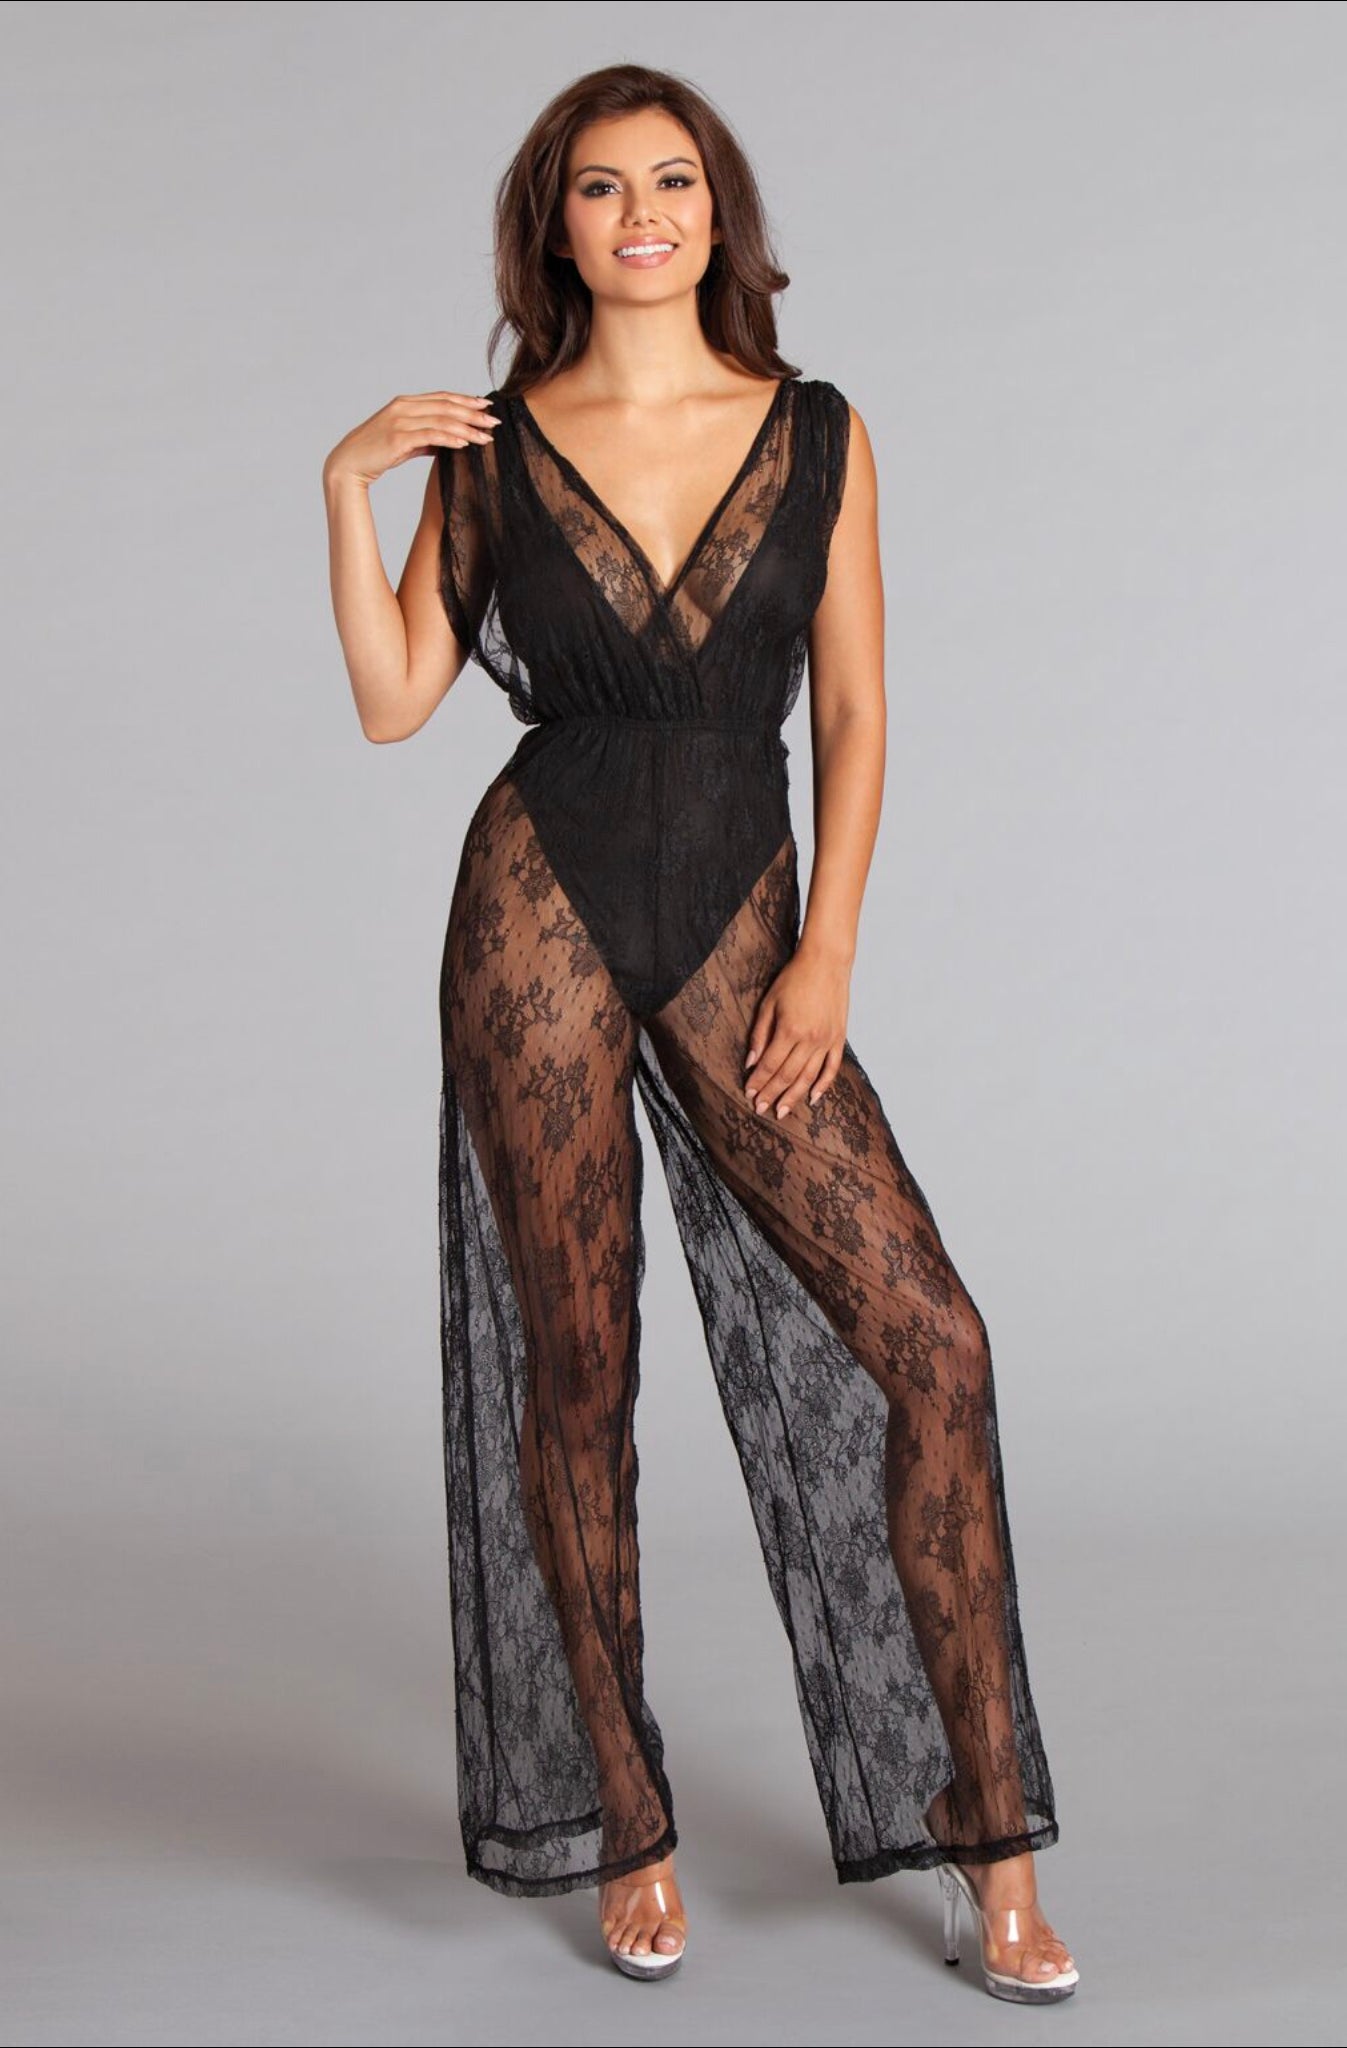 ROCK WITH YOU JUMPSUIT LACE OVERLAY JUMPSUIT WITH BODYSUIT LINING. SHIRRED CROSSOVER FRONT AND WIDE LEGS